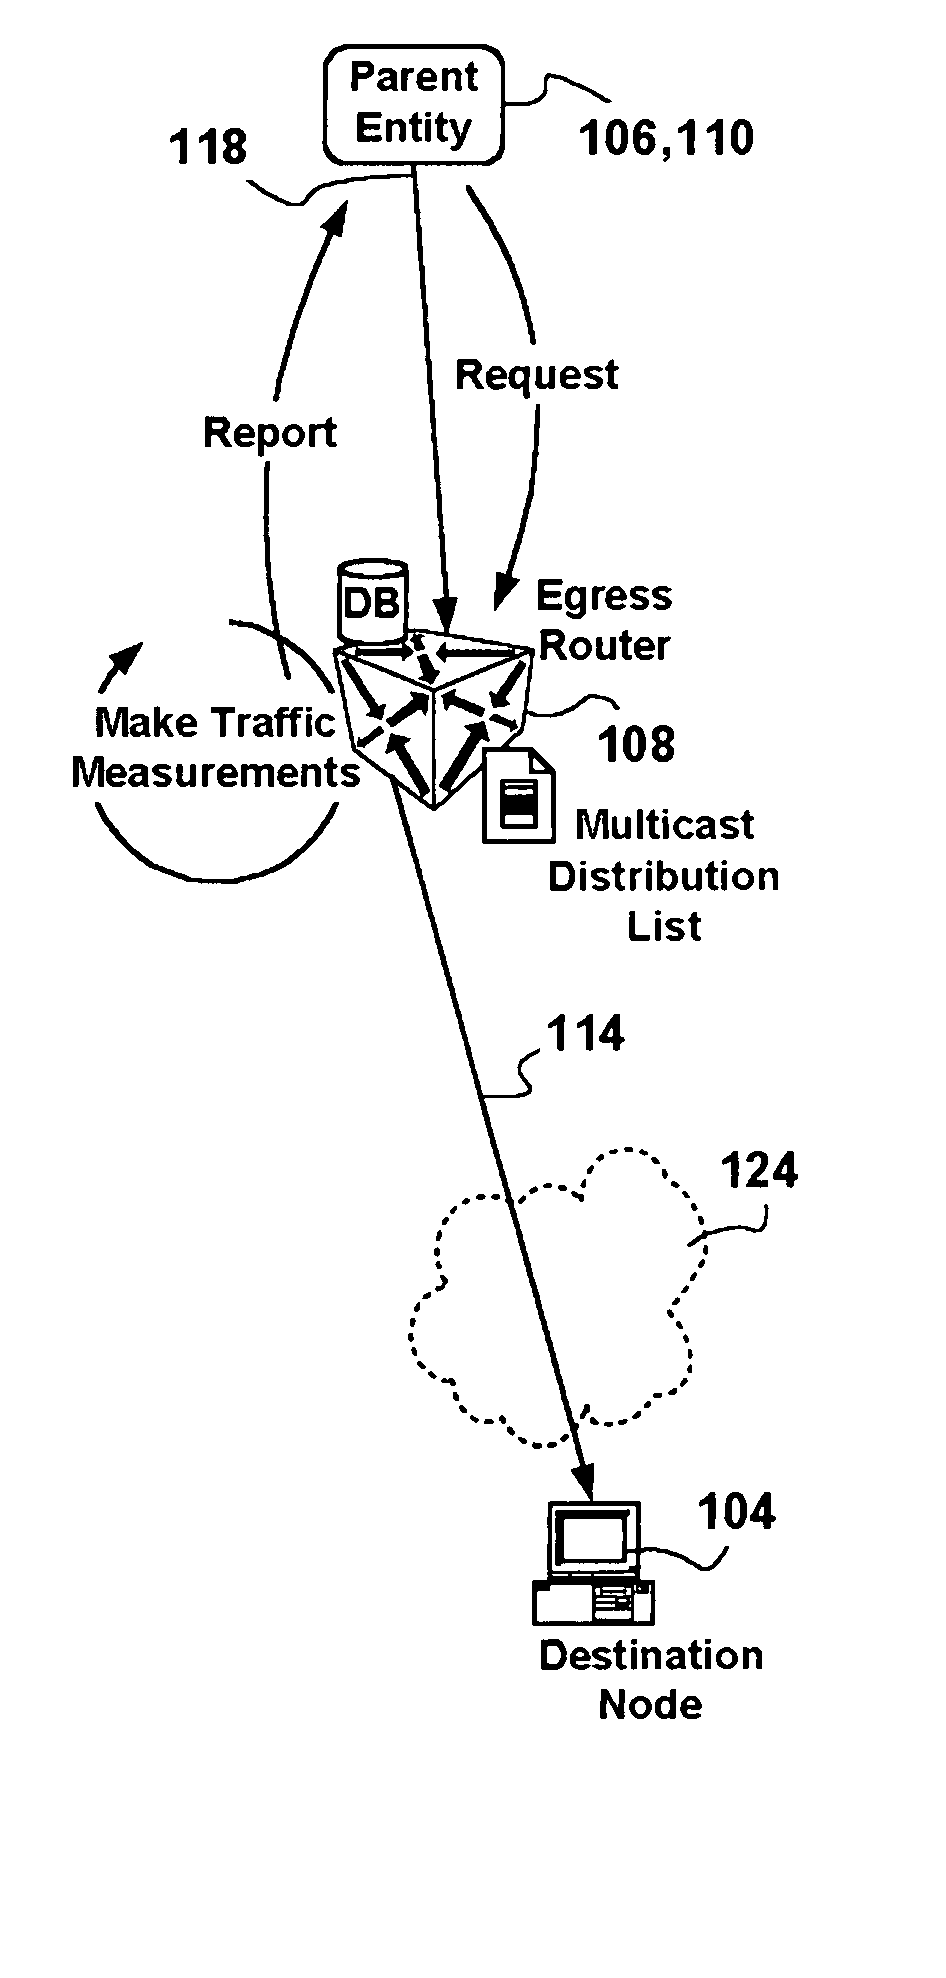 Multicast flow accounting